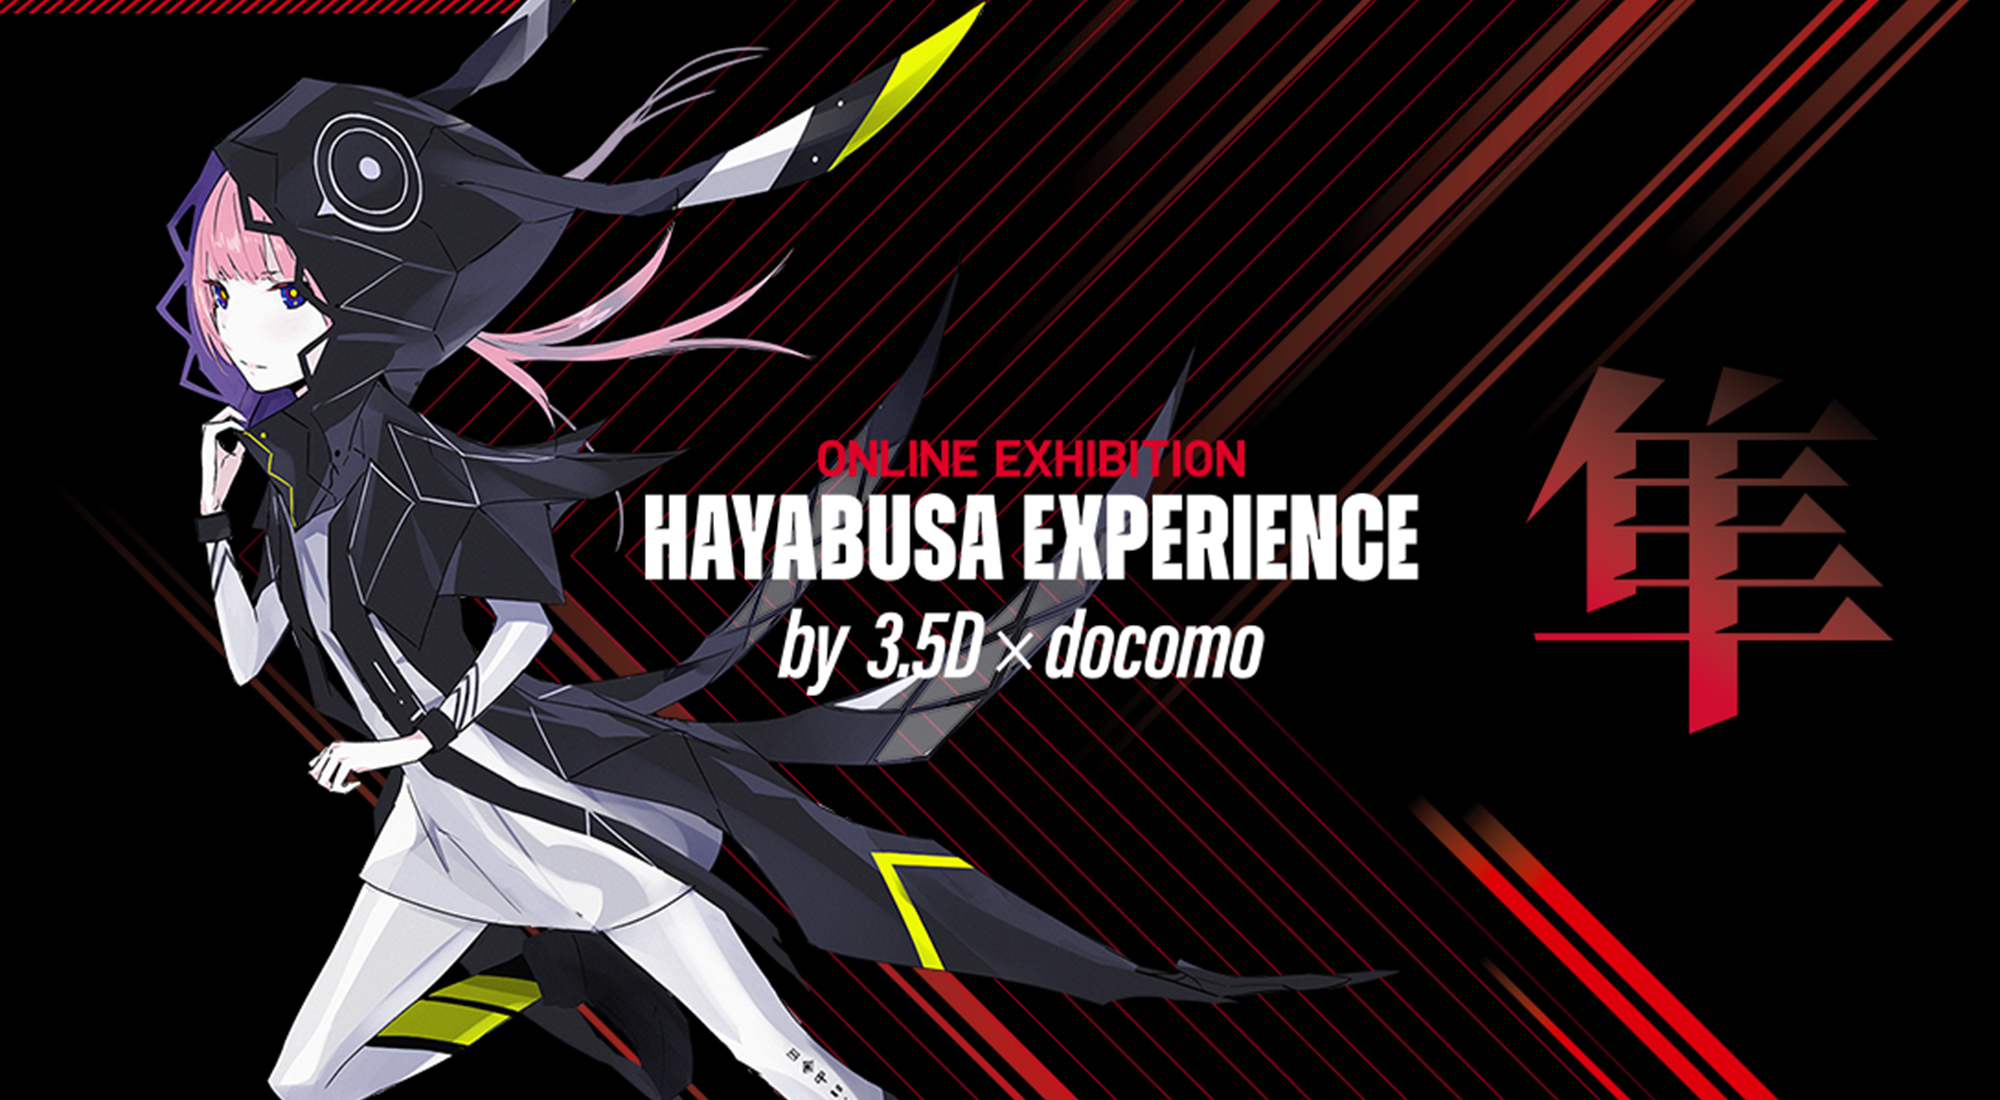 HAYABUSA EXPERIENCE by 3.5D × docomo ONLINE EXHIBITION